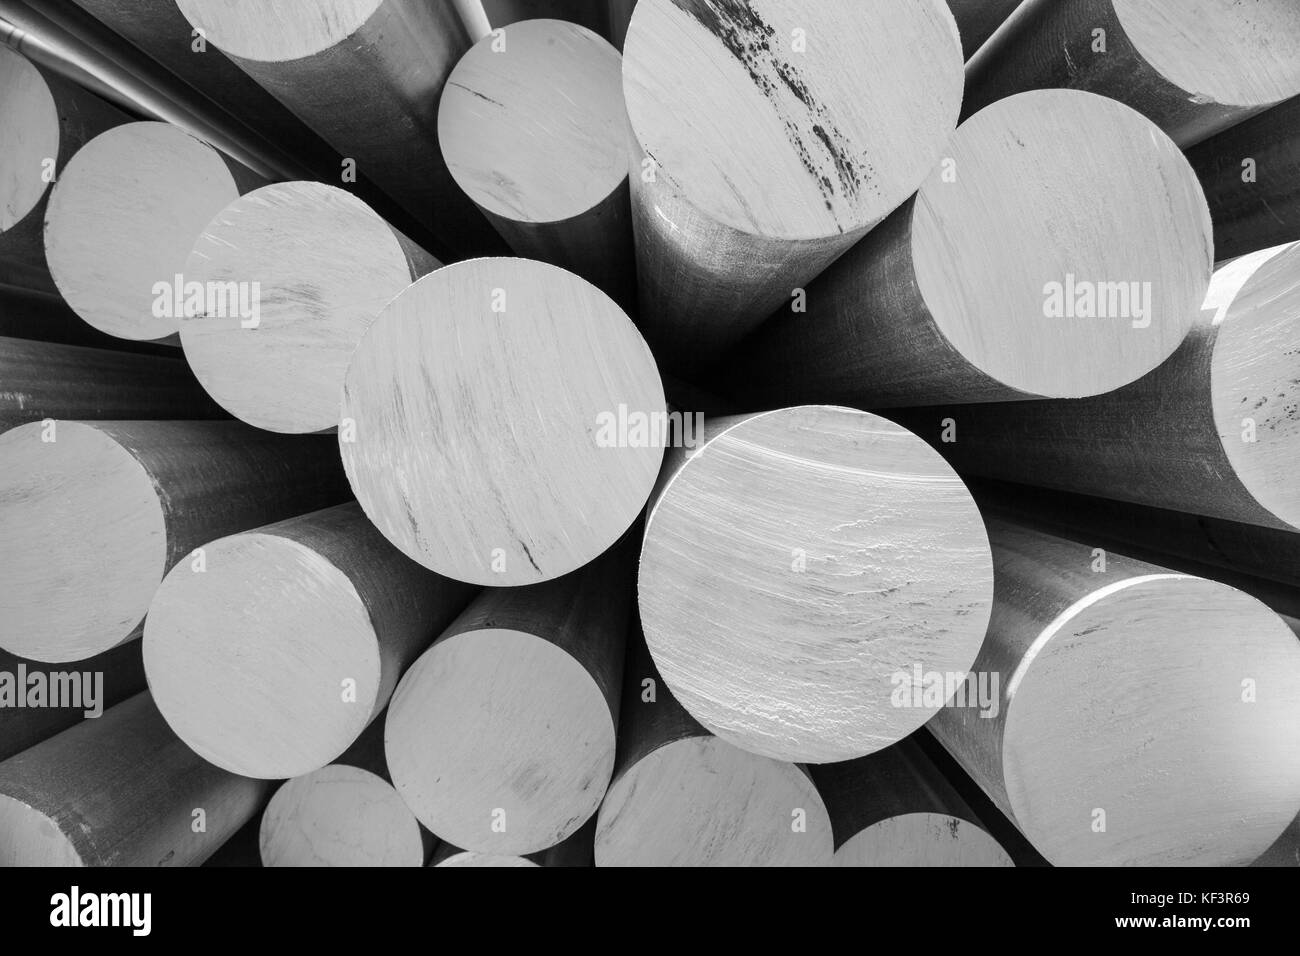 aluminum metal raw material in the form of long tubes Stock Photo